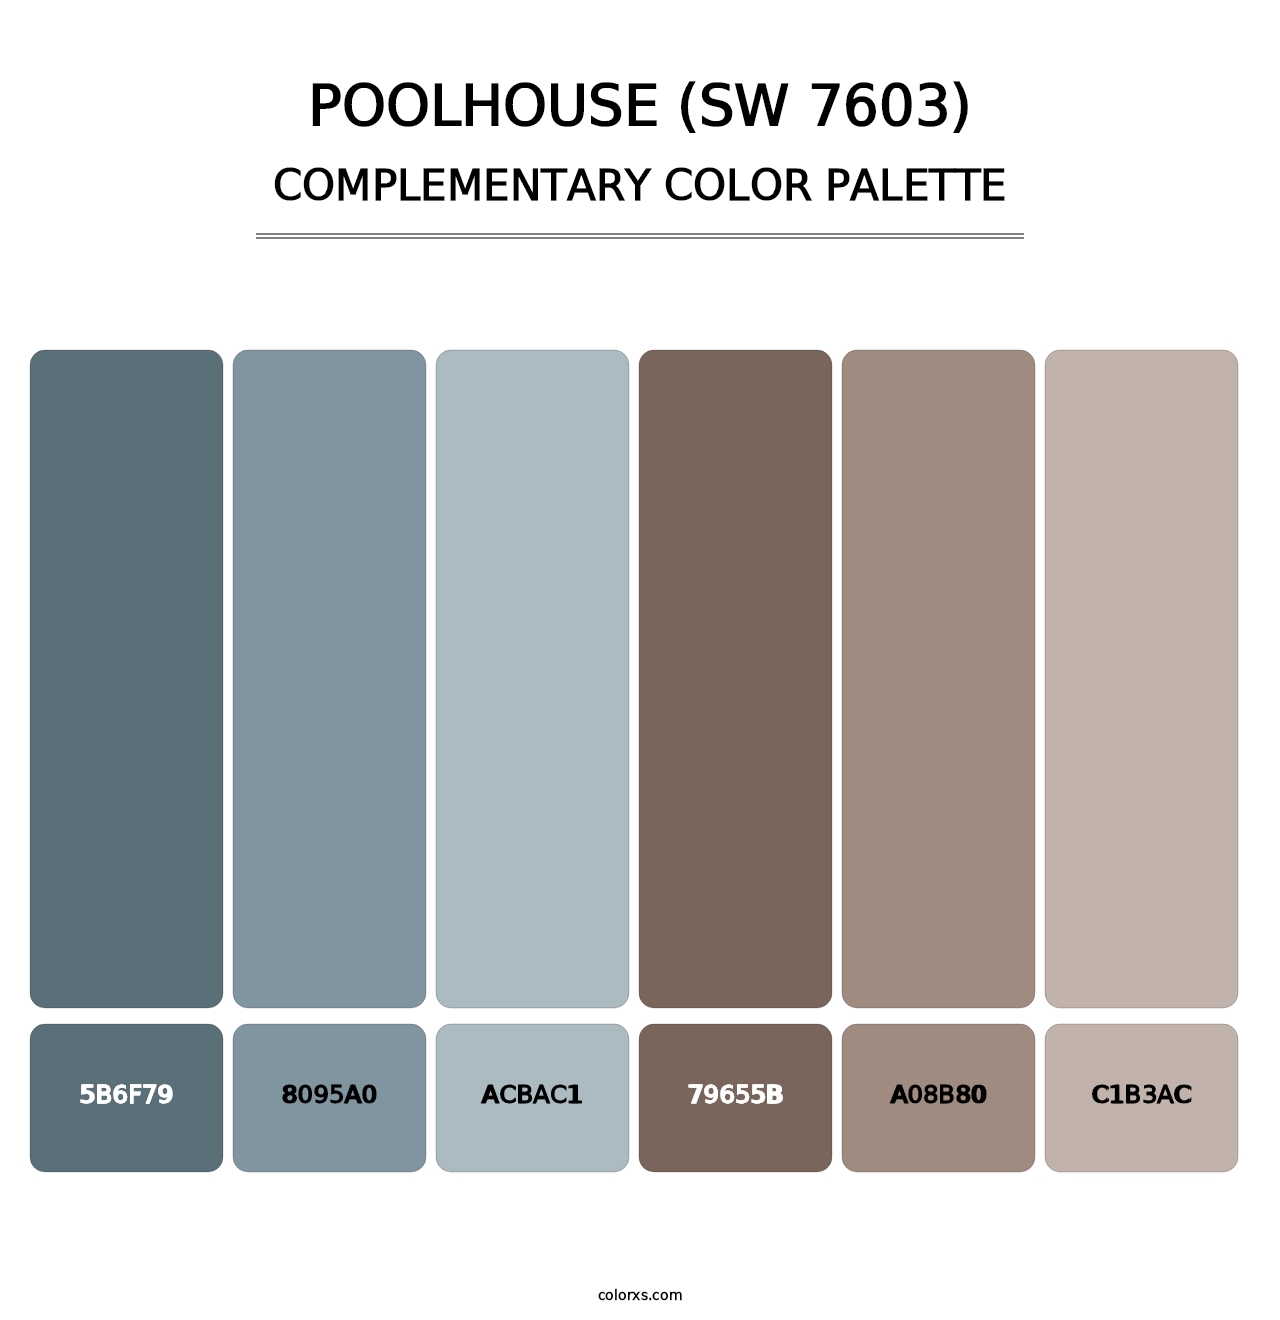 Poolhouse (SW 7603) - Complementary Color Palette